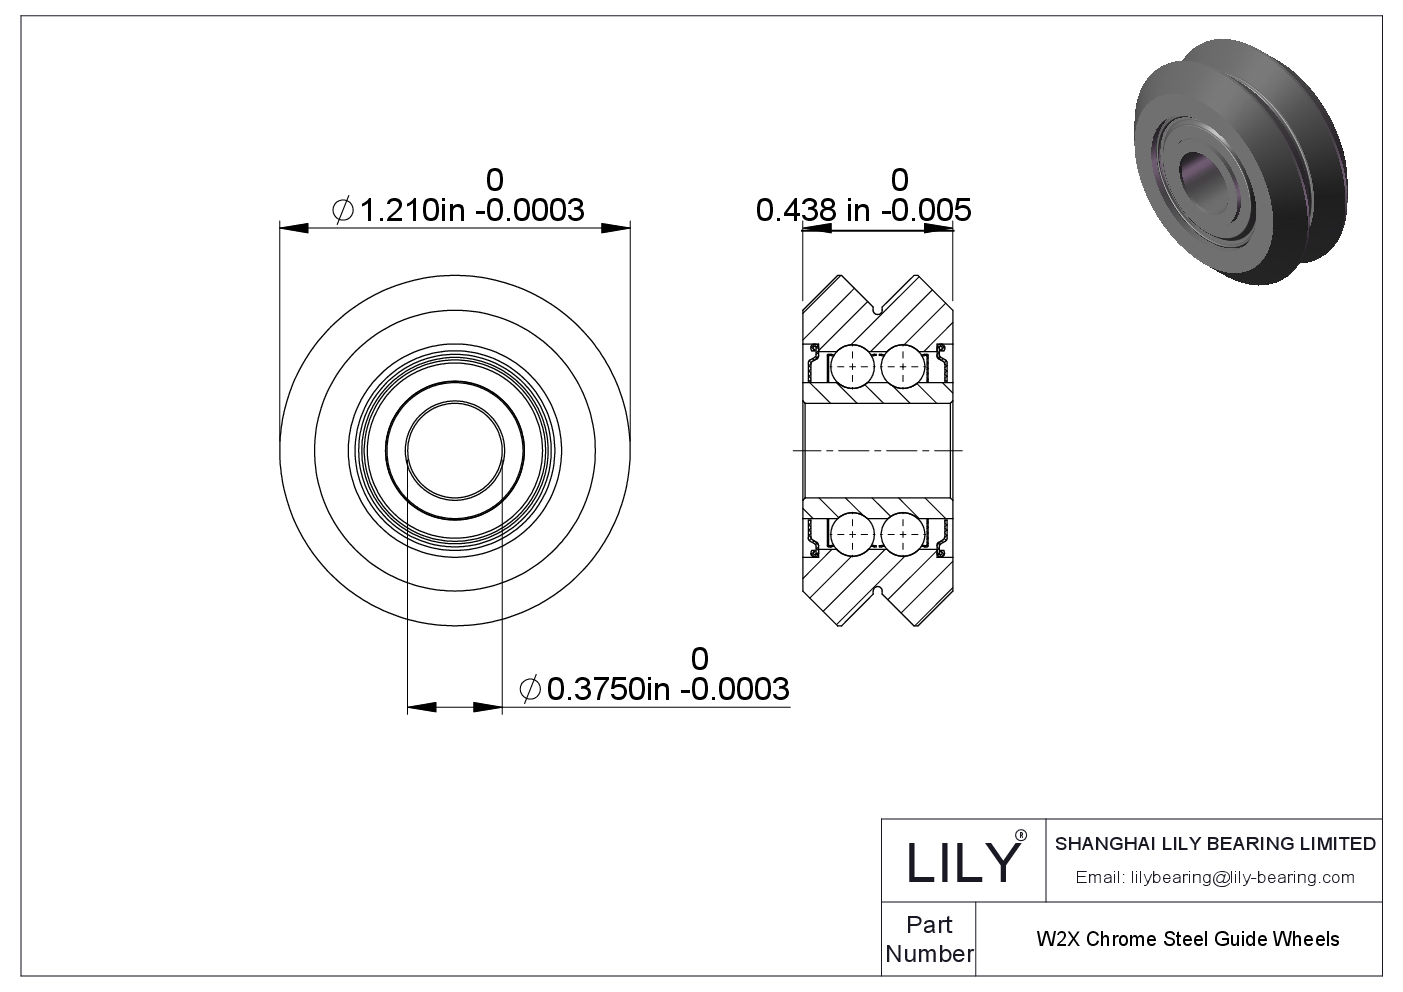 W2X Chrome Steel Guide Wheels cad drawing